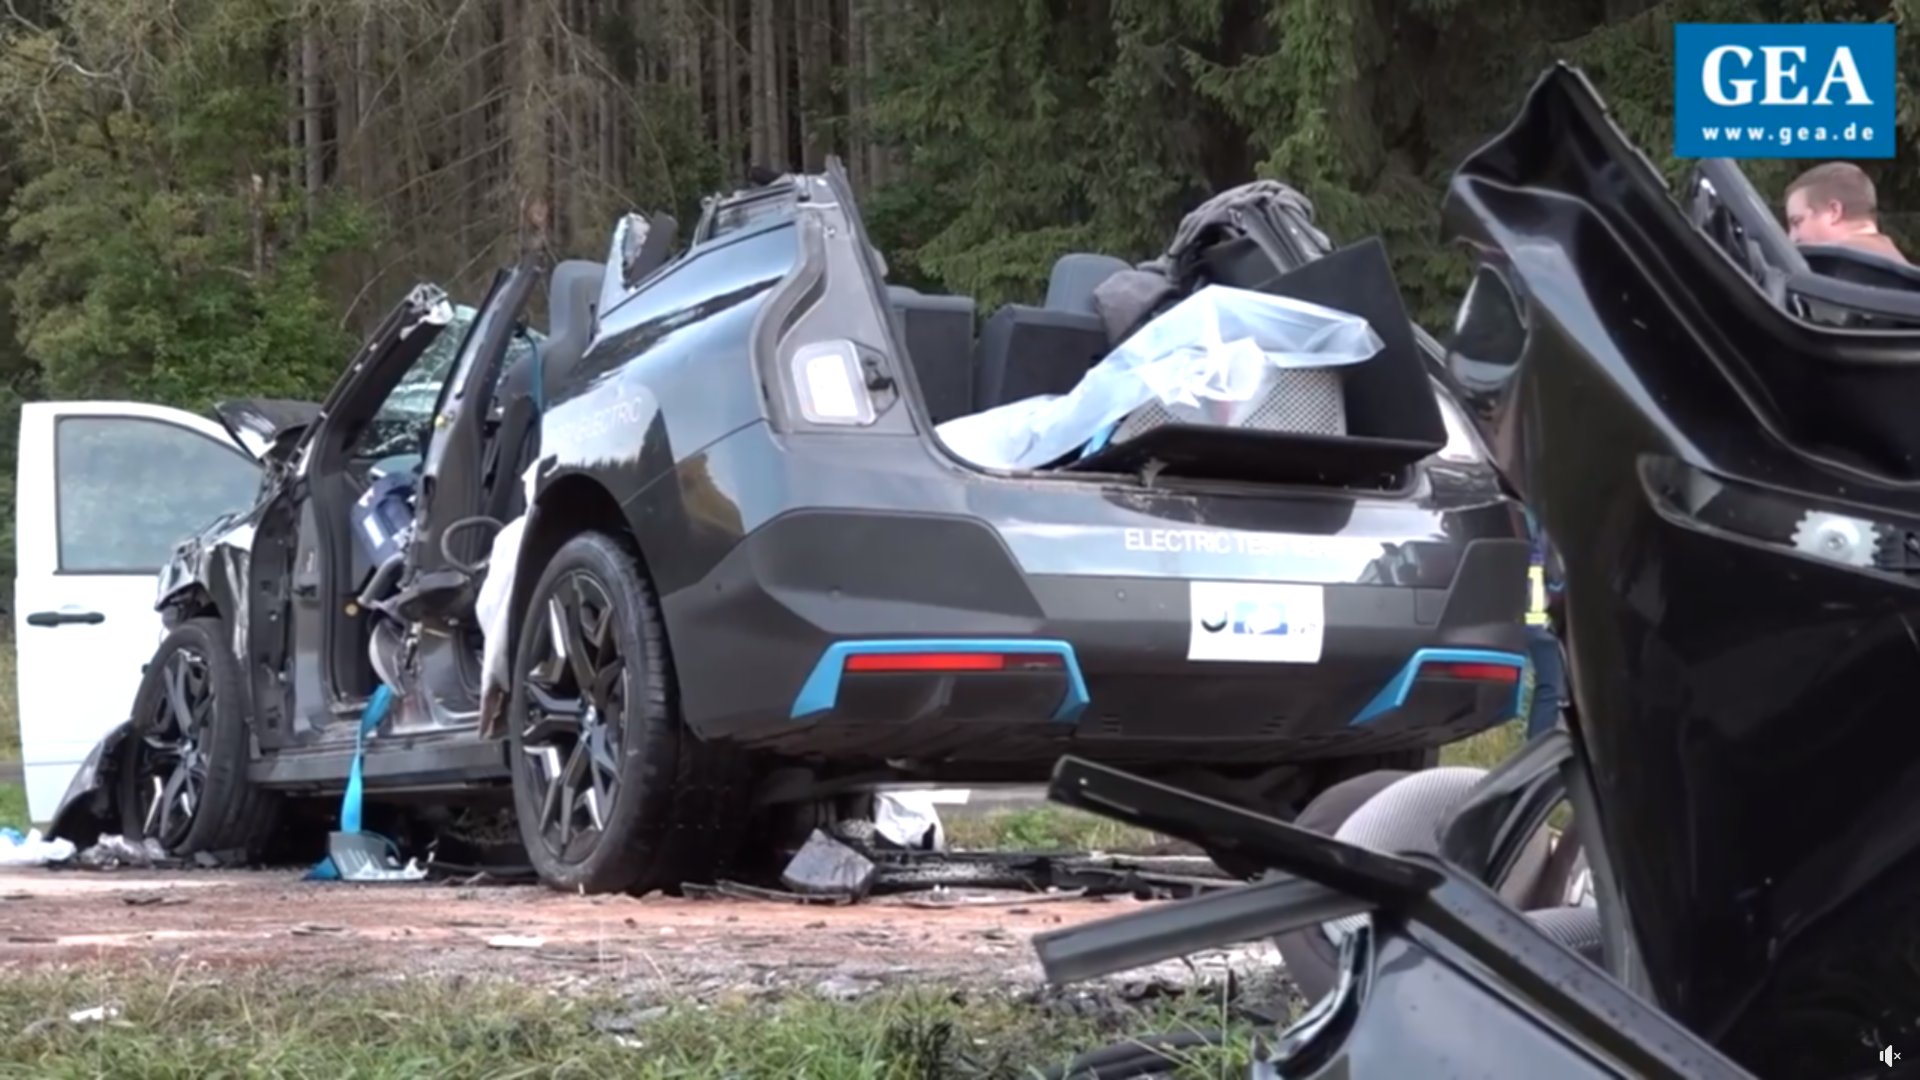 BMW iX With an "Autonomous Driving" Label Crashes in Germany, Killing One, Injuring Nine